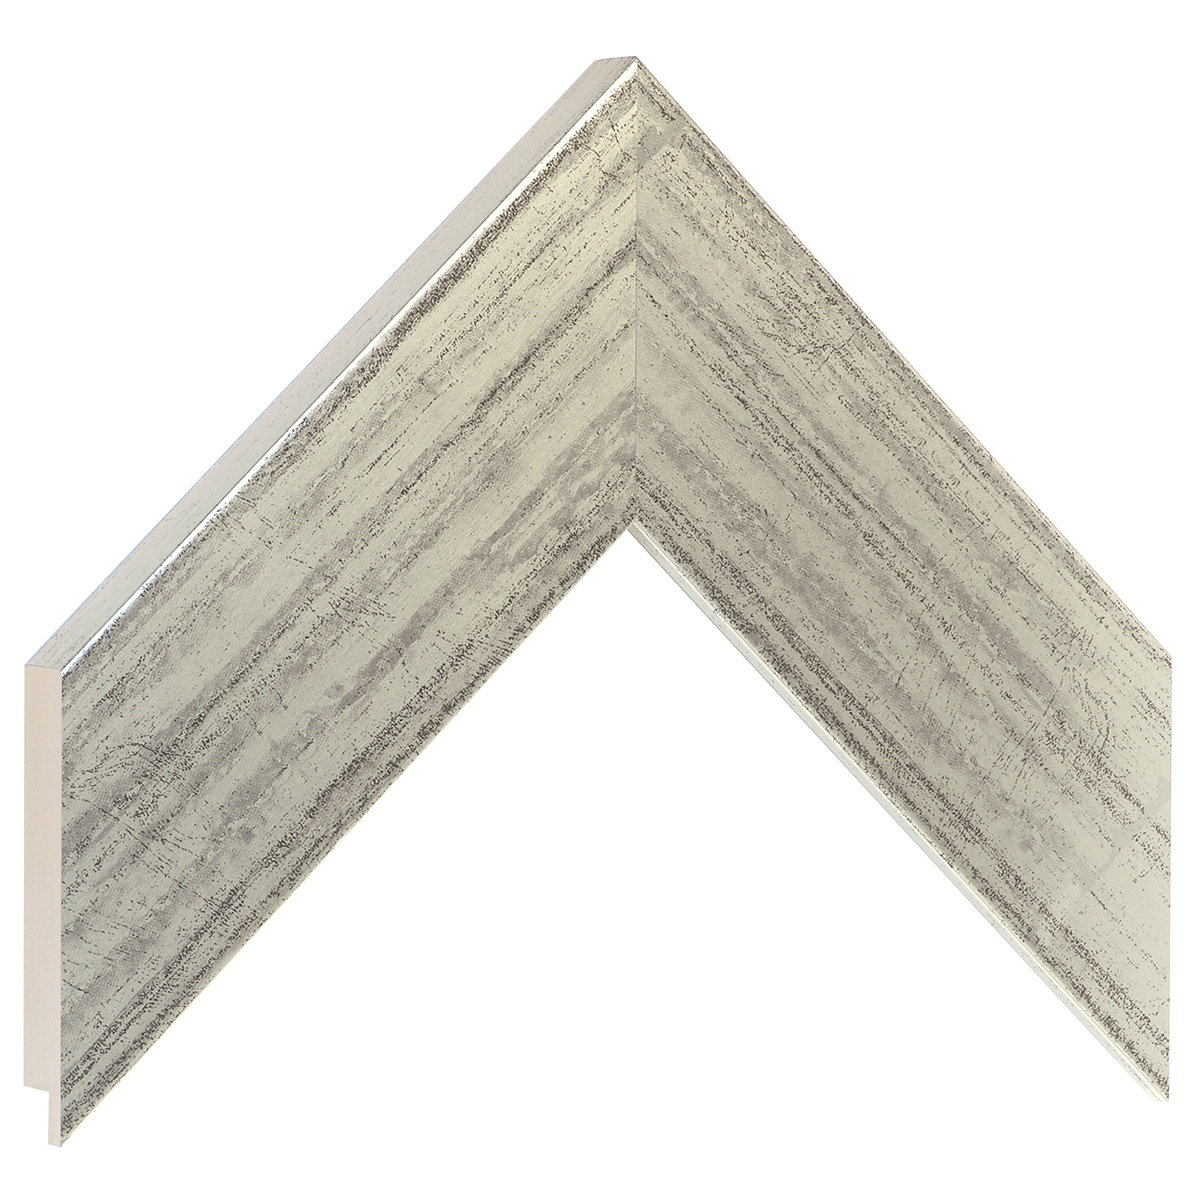 Moulding ayous, width 58mm height 20 - distressed silver  - Sample